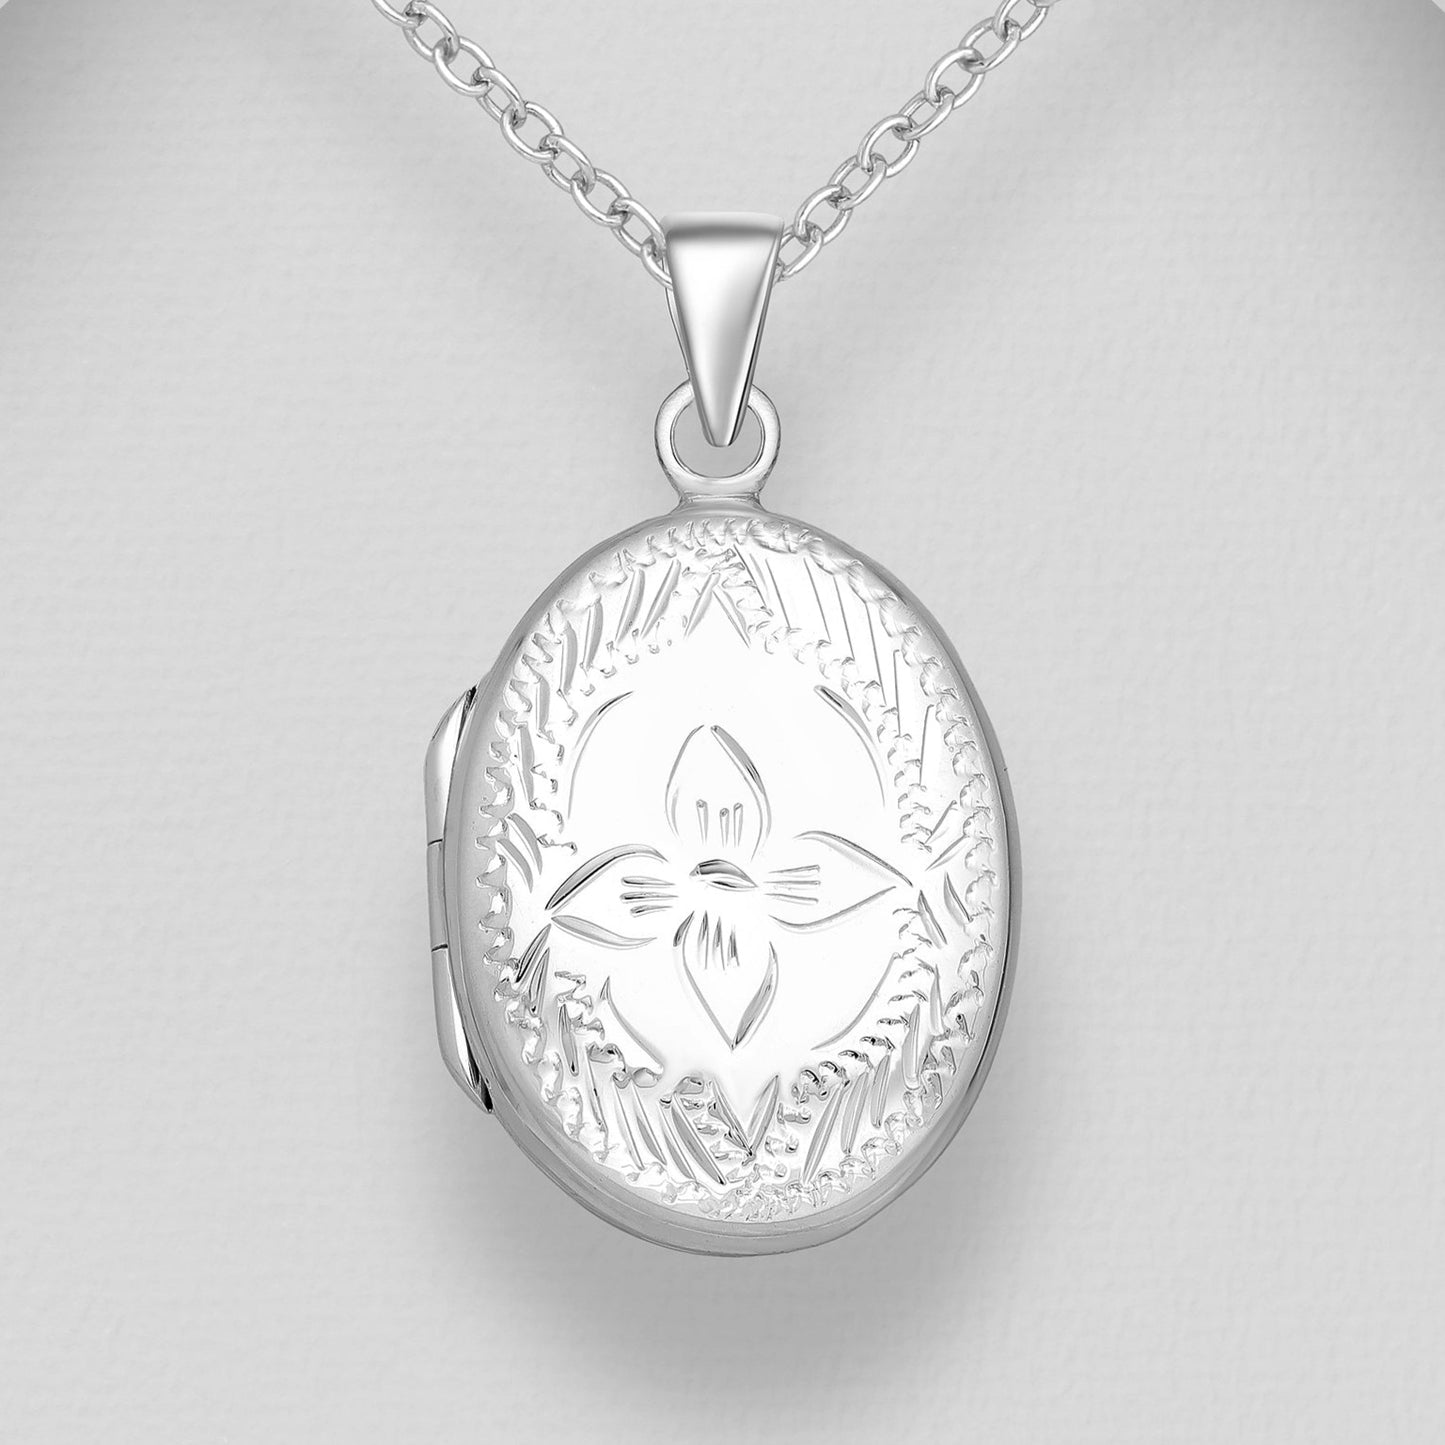 Oval Picture Locket Necklace, sterling  silver on a silver chain